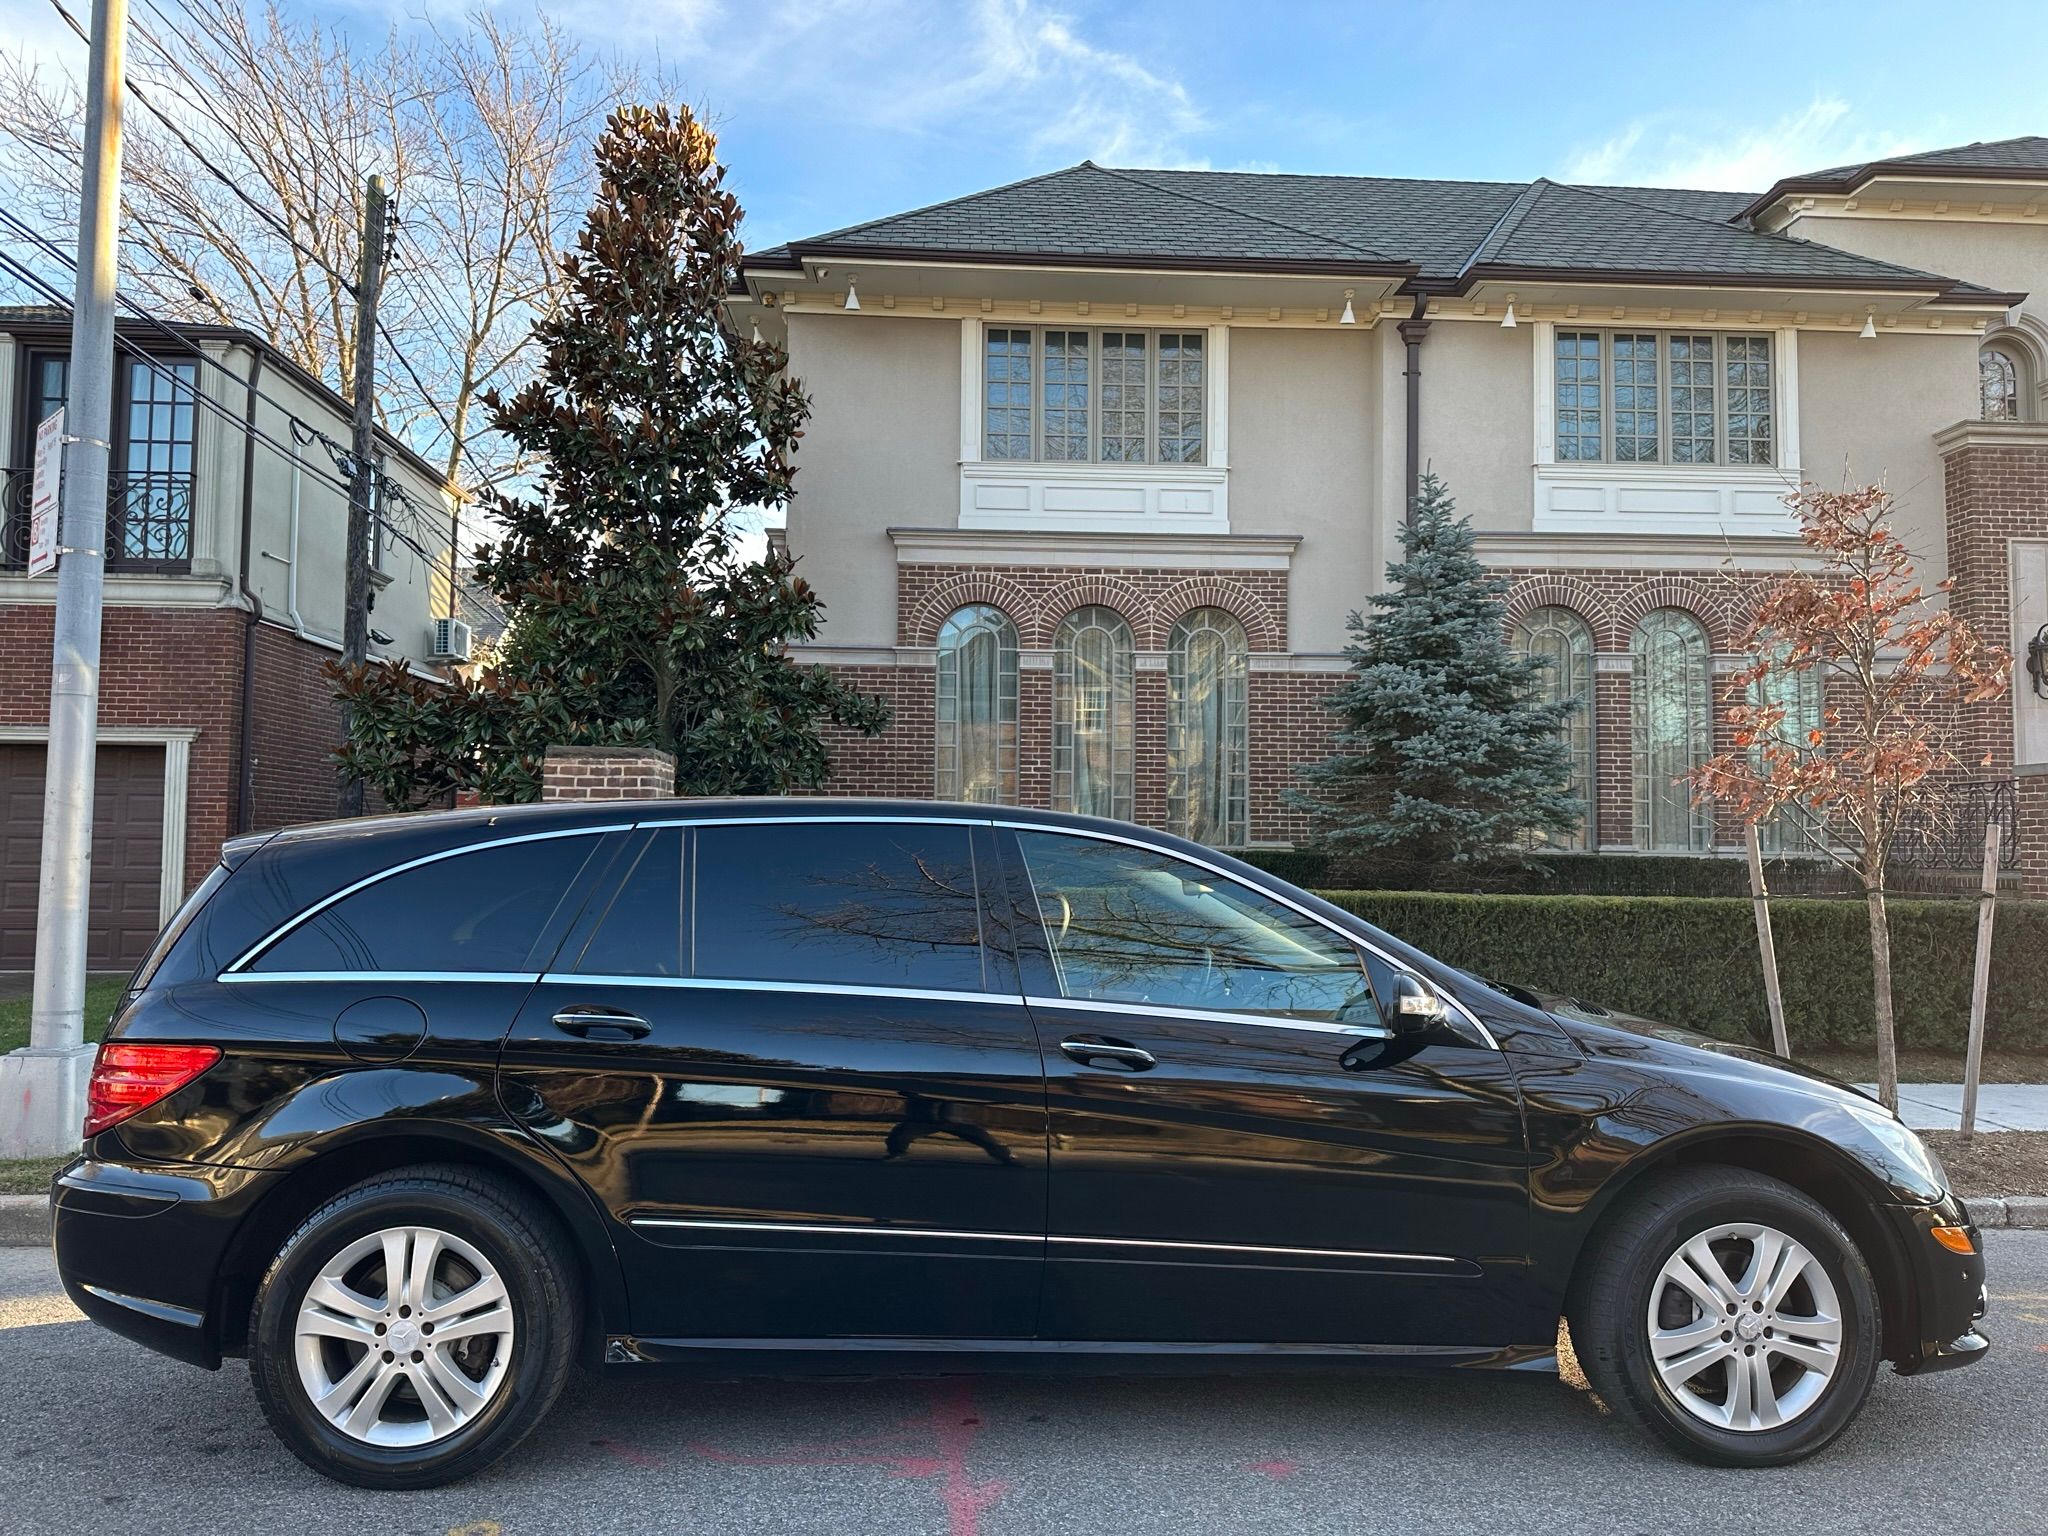 Used Mercedes-Benz R-Class for Sale Near Me | Cars.com